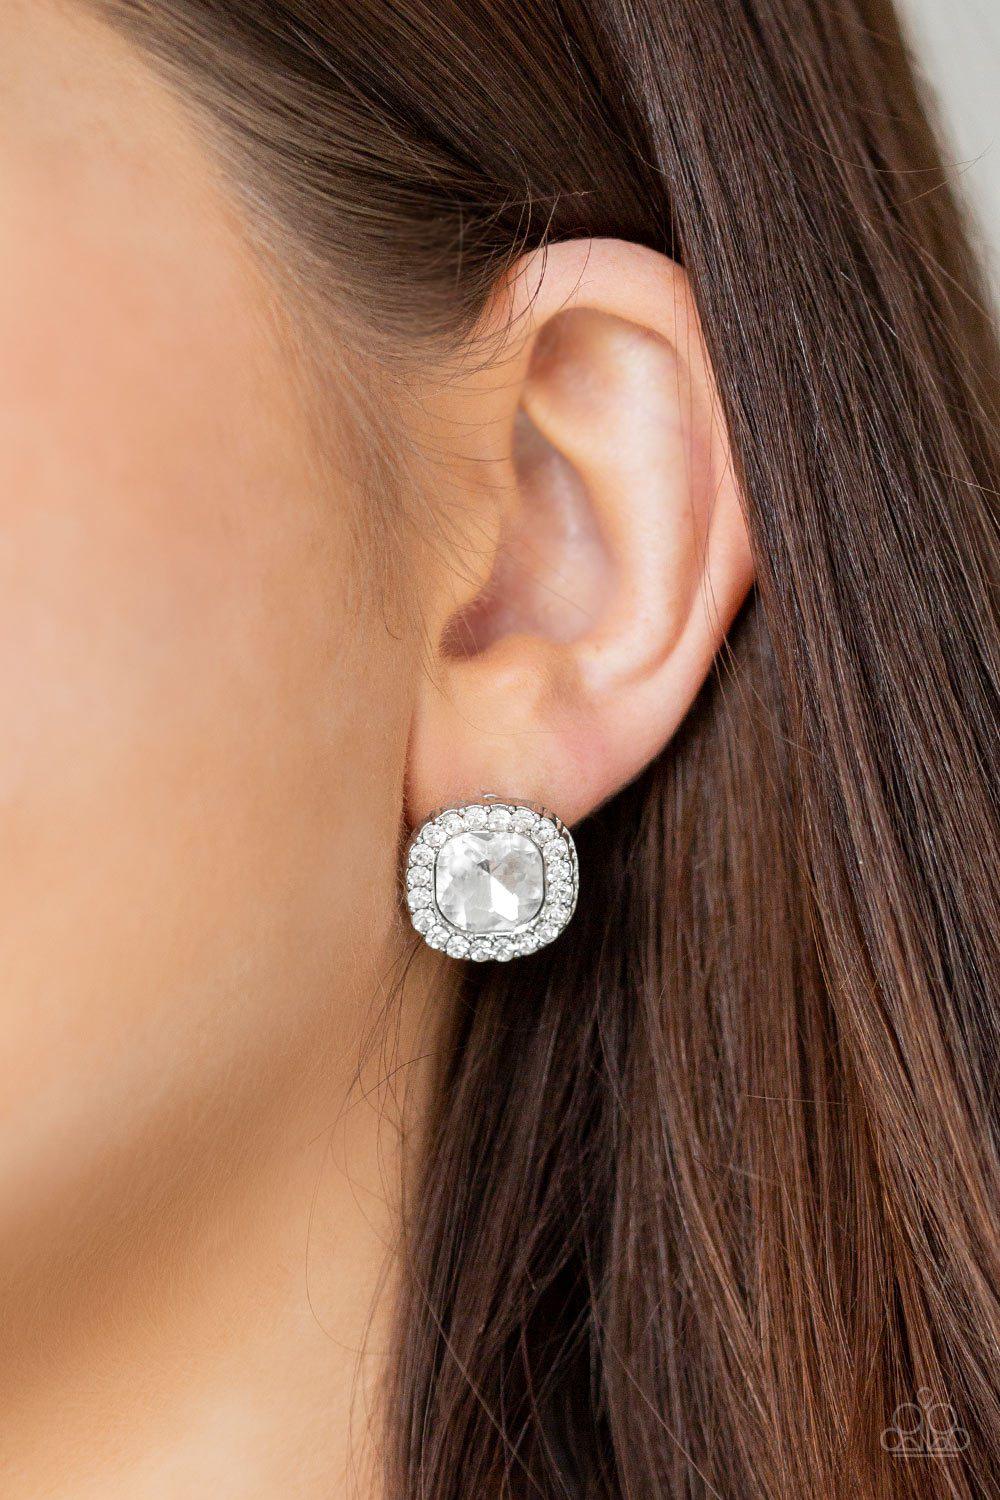 BLING-tastic! White Rhinestone Post Earrings - Paparazzi Accessories - model -CarasShop.com - $5 Jewelry by Cara Jewels